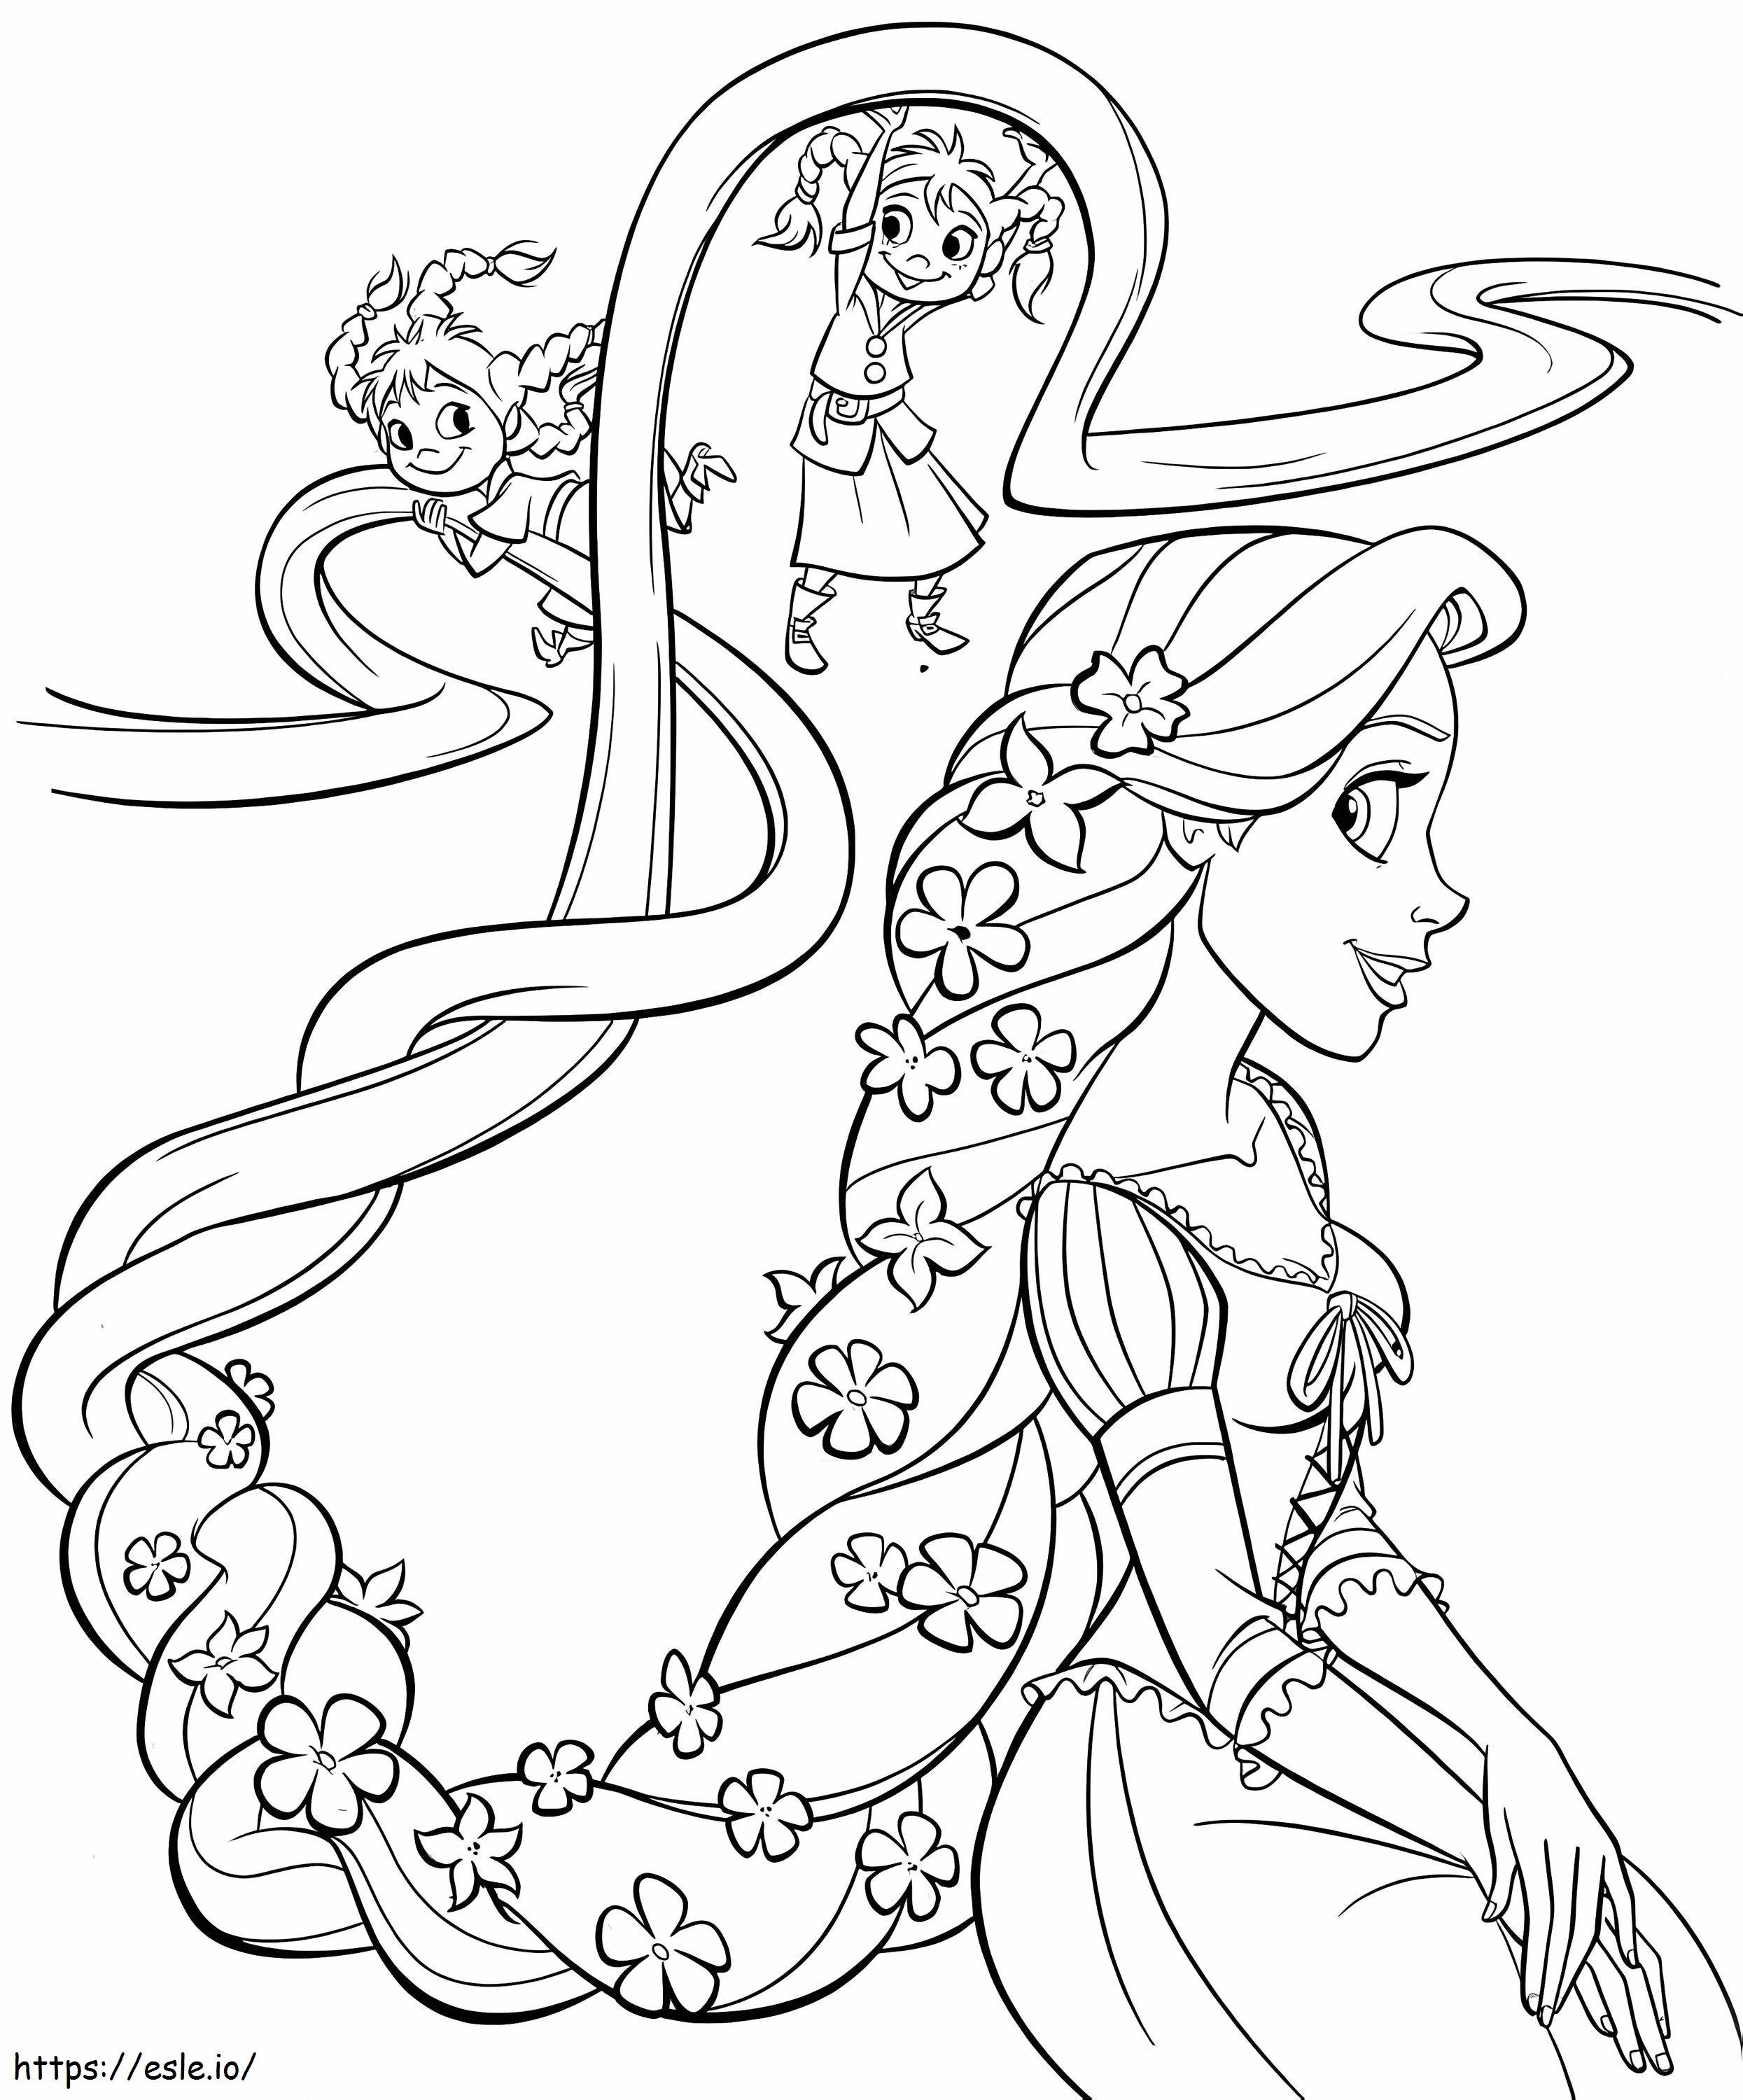 Princess Rapunzel And Children coloring page